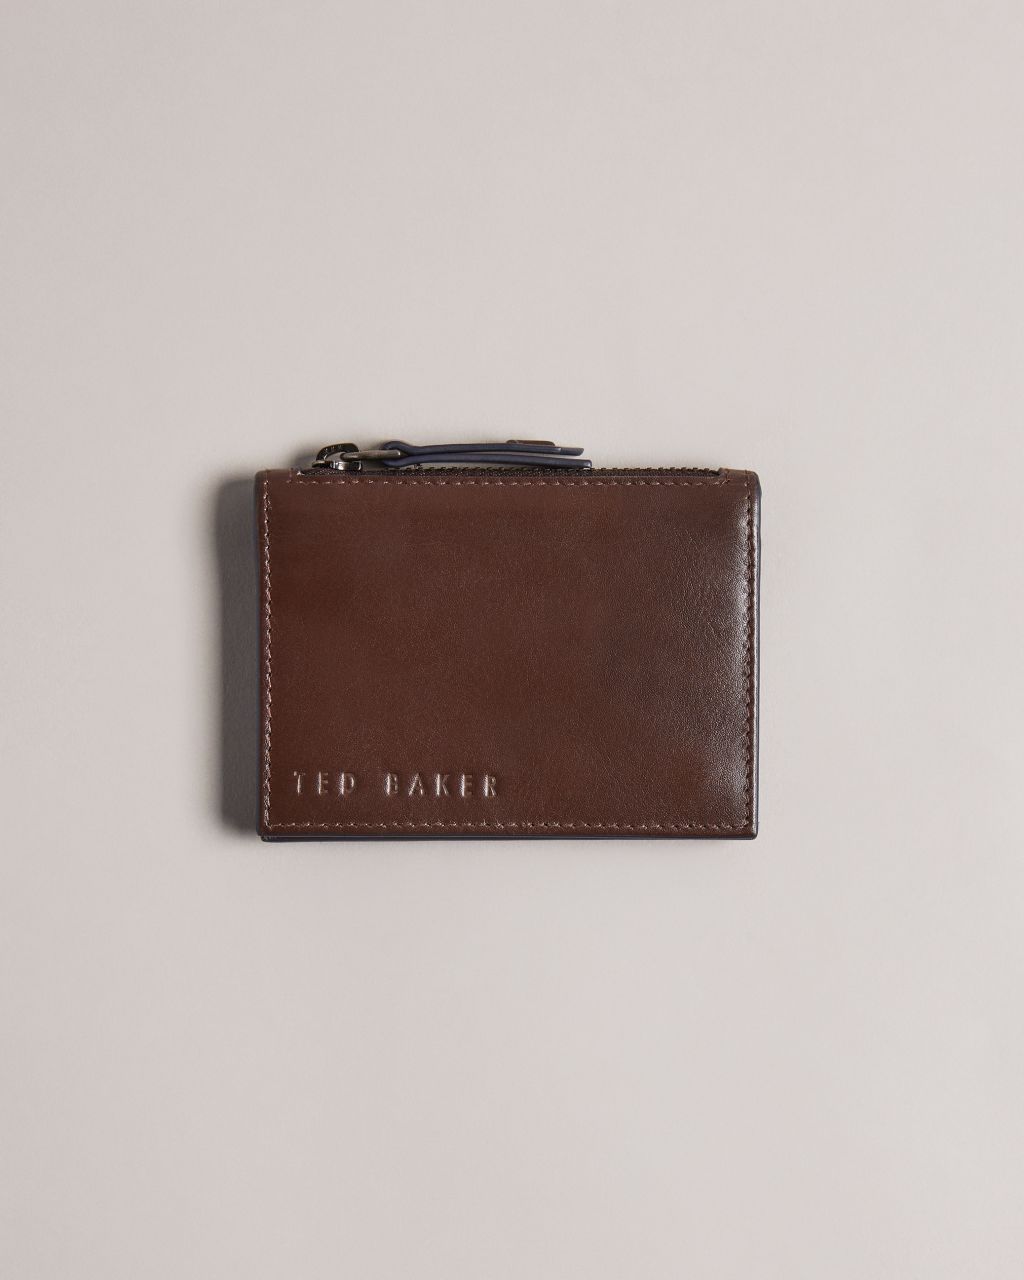 Ted Baker Men's Zipped Cardholder in Brown-Chocolate, Nator, Leather